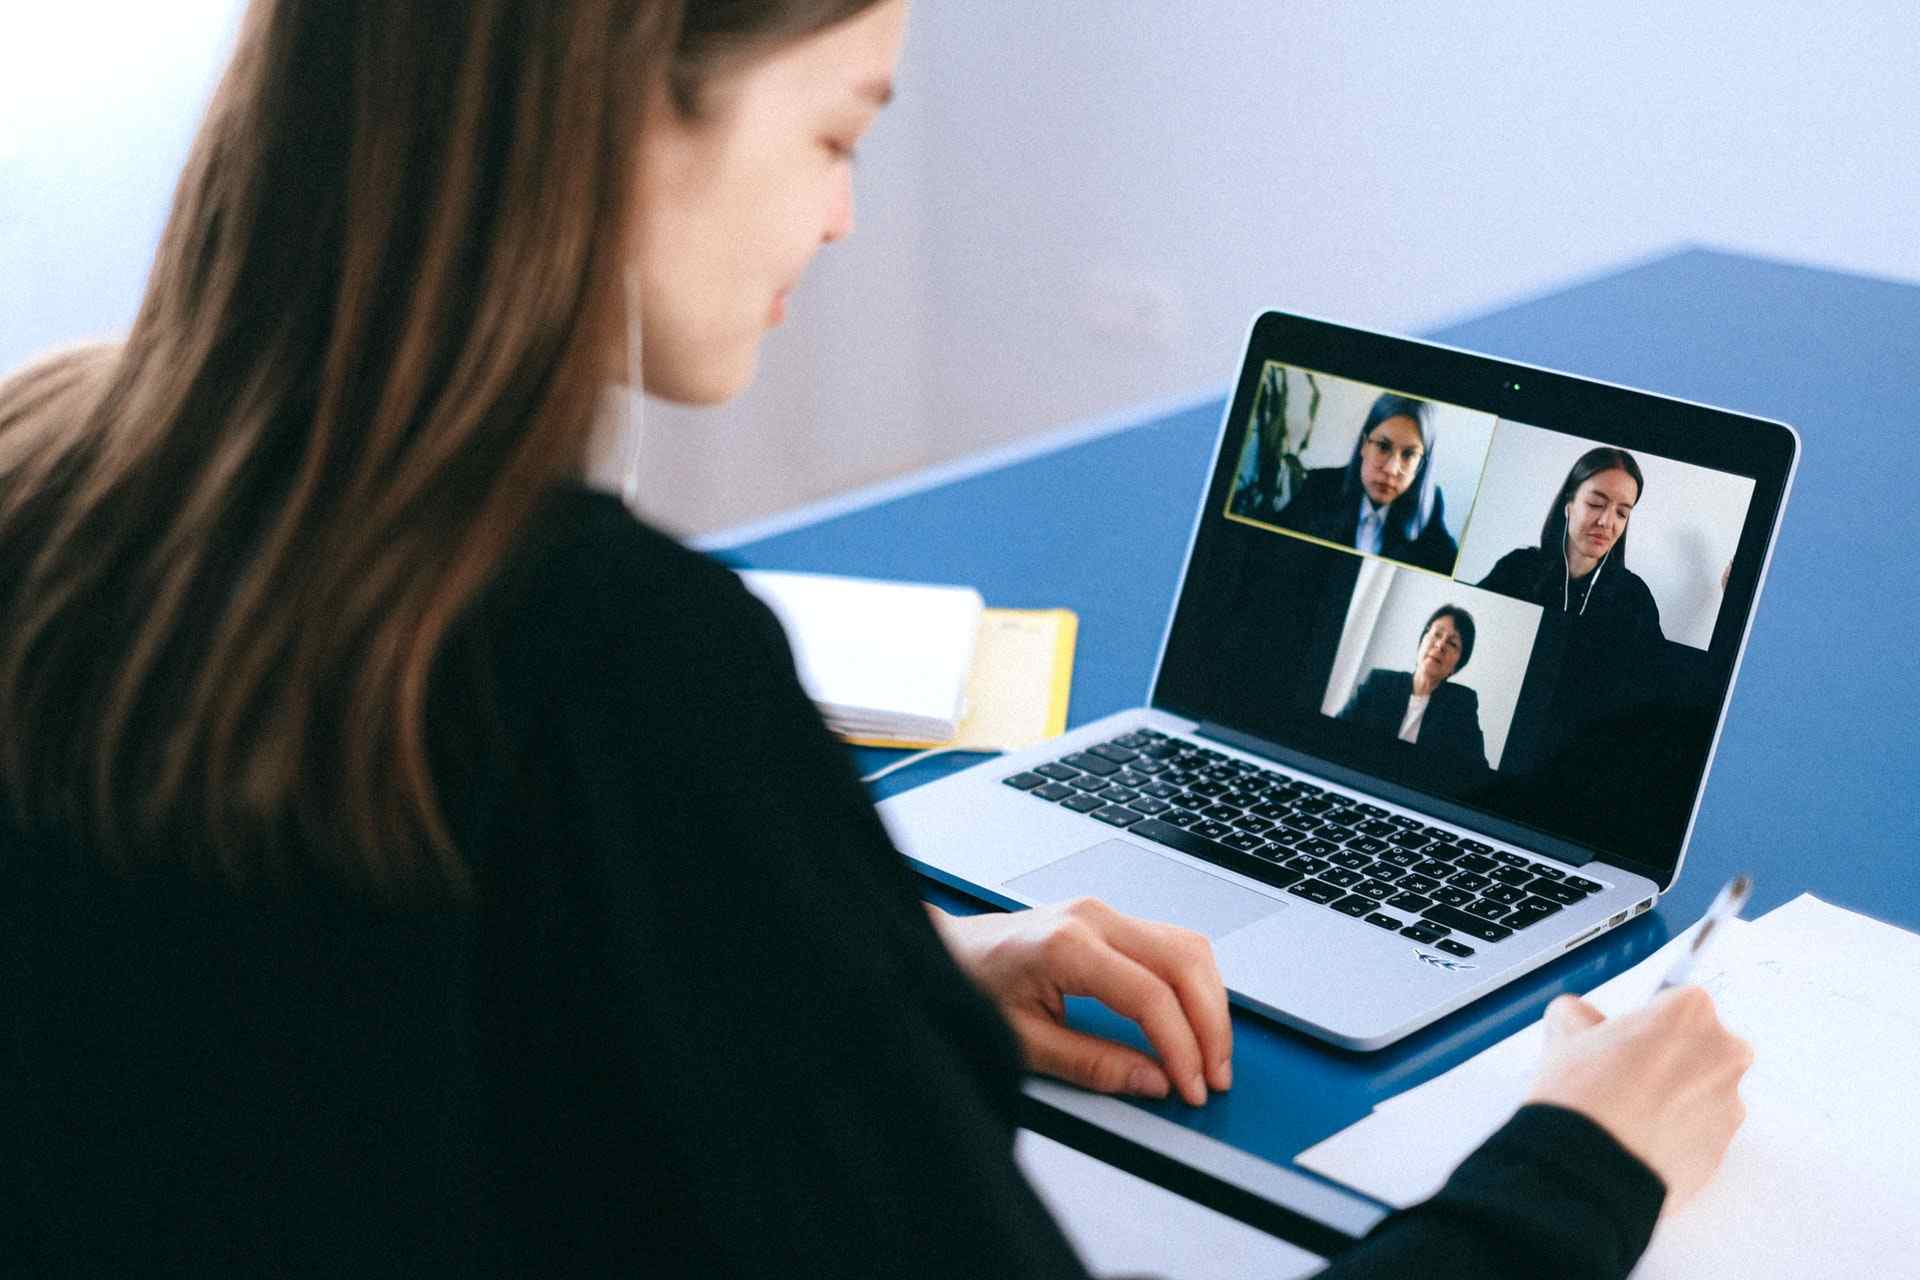 Skype Launches Free Group Video Calling Service (Finally!)